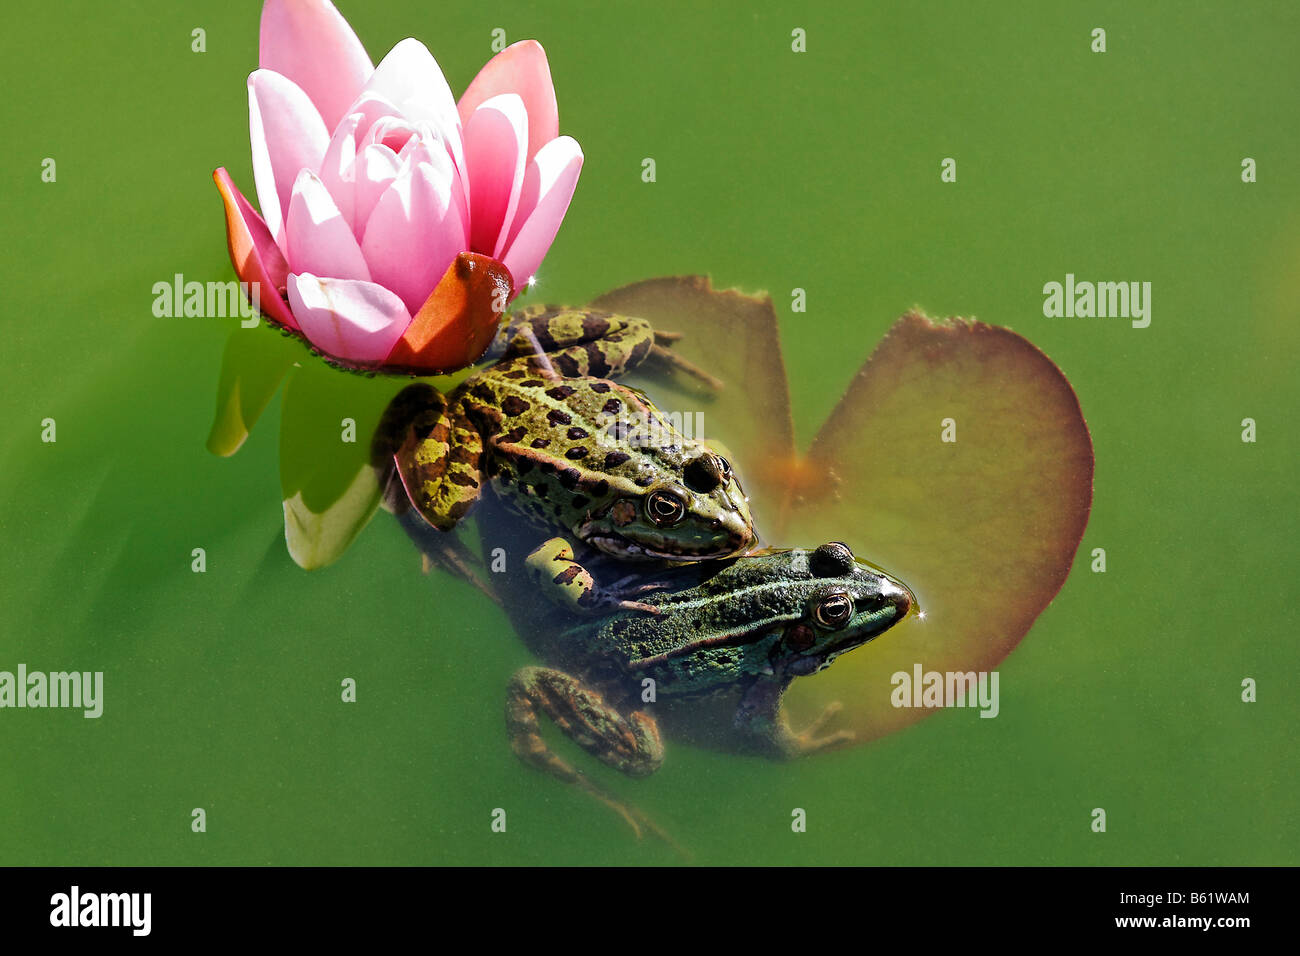 Two Marsh Frogs (Rana ridibunda), next to each other after the Amplexus, in a green pond on a water lily Stock Photo